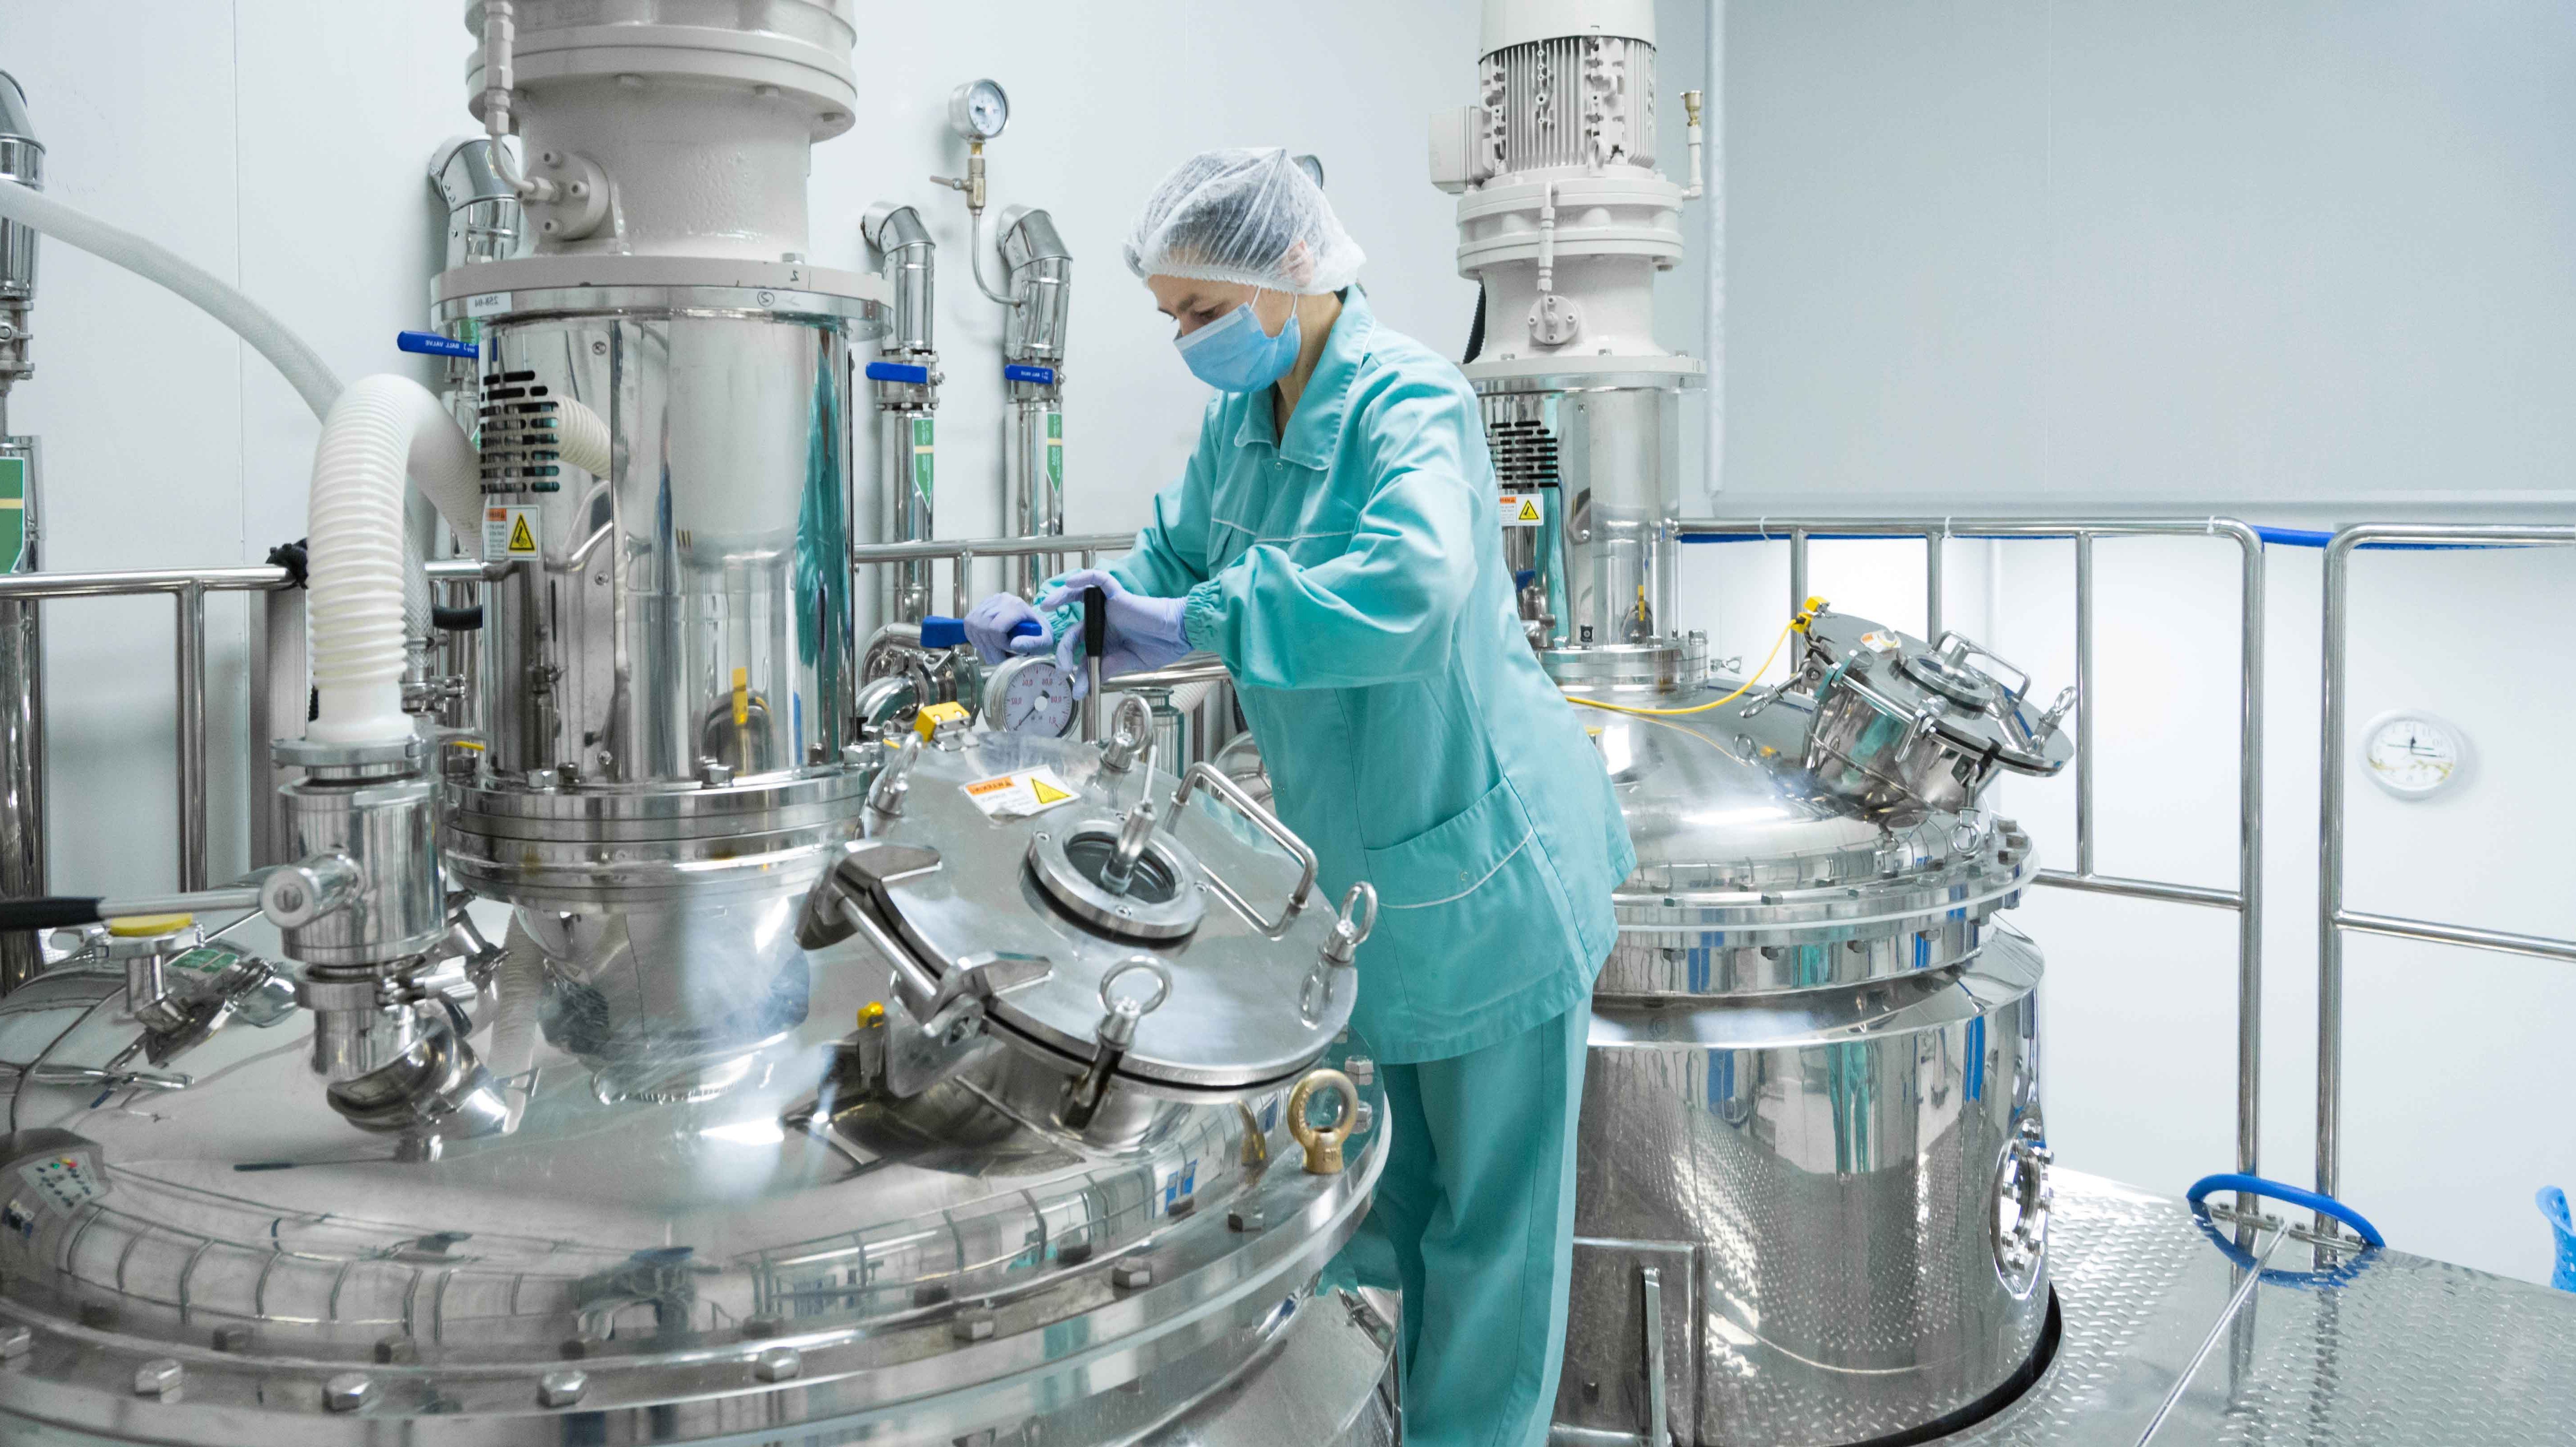 A female factory worker in pharmaceutical clothing standing beside a large fluid machinery.